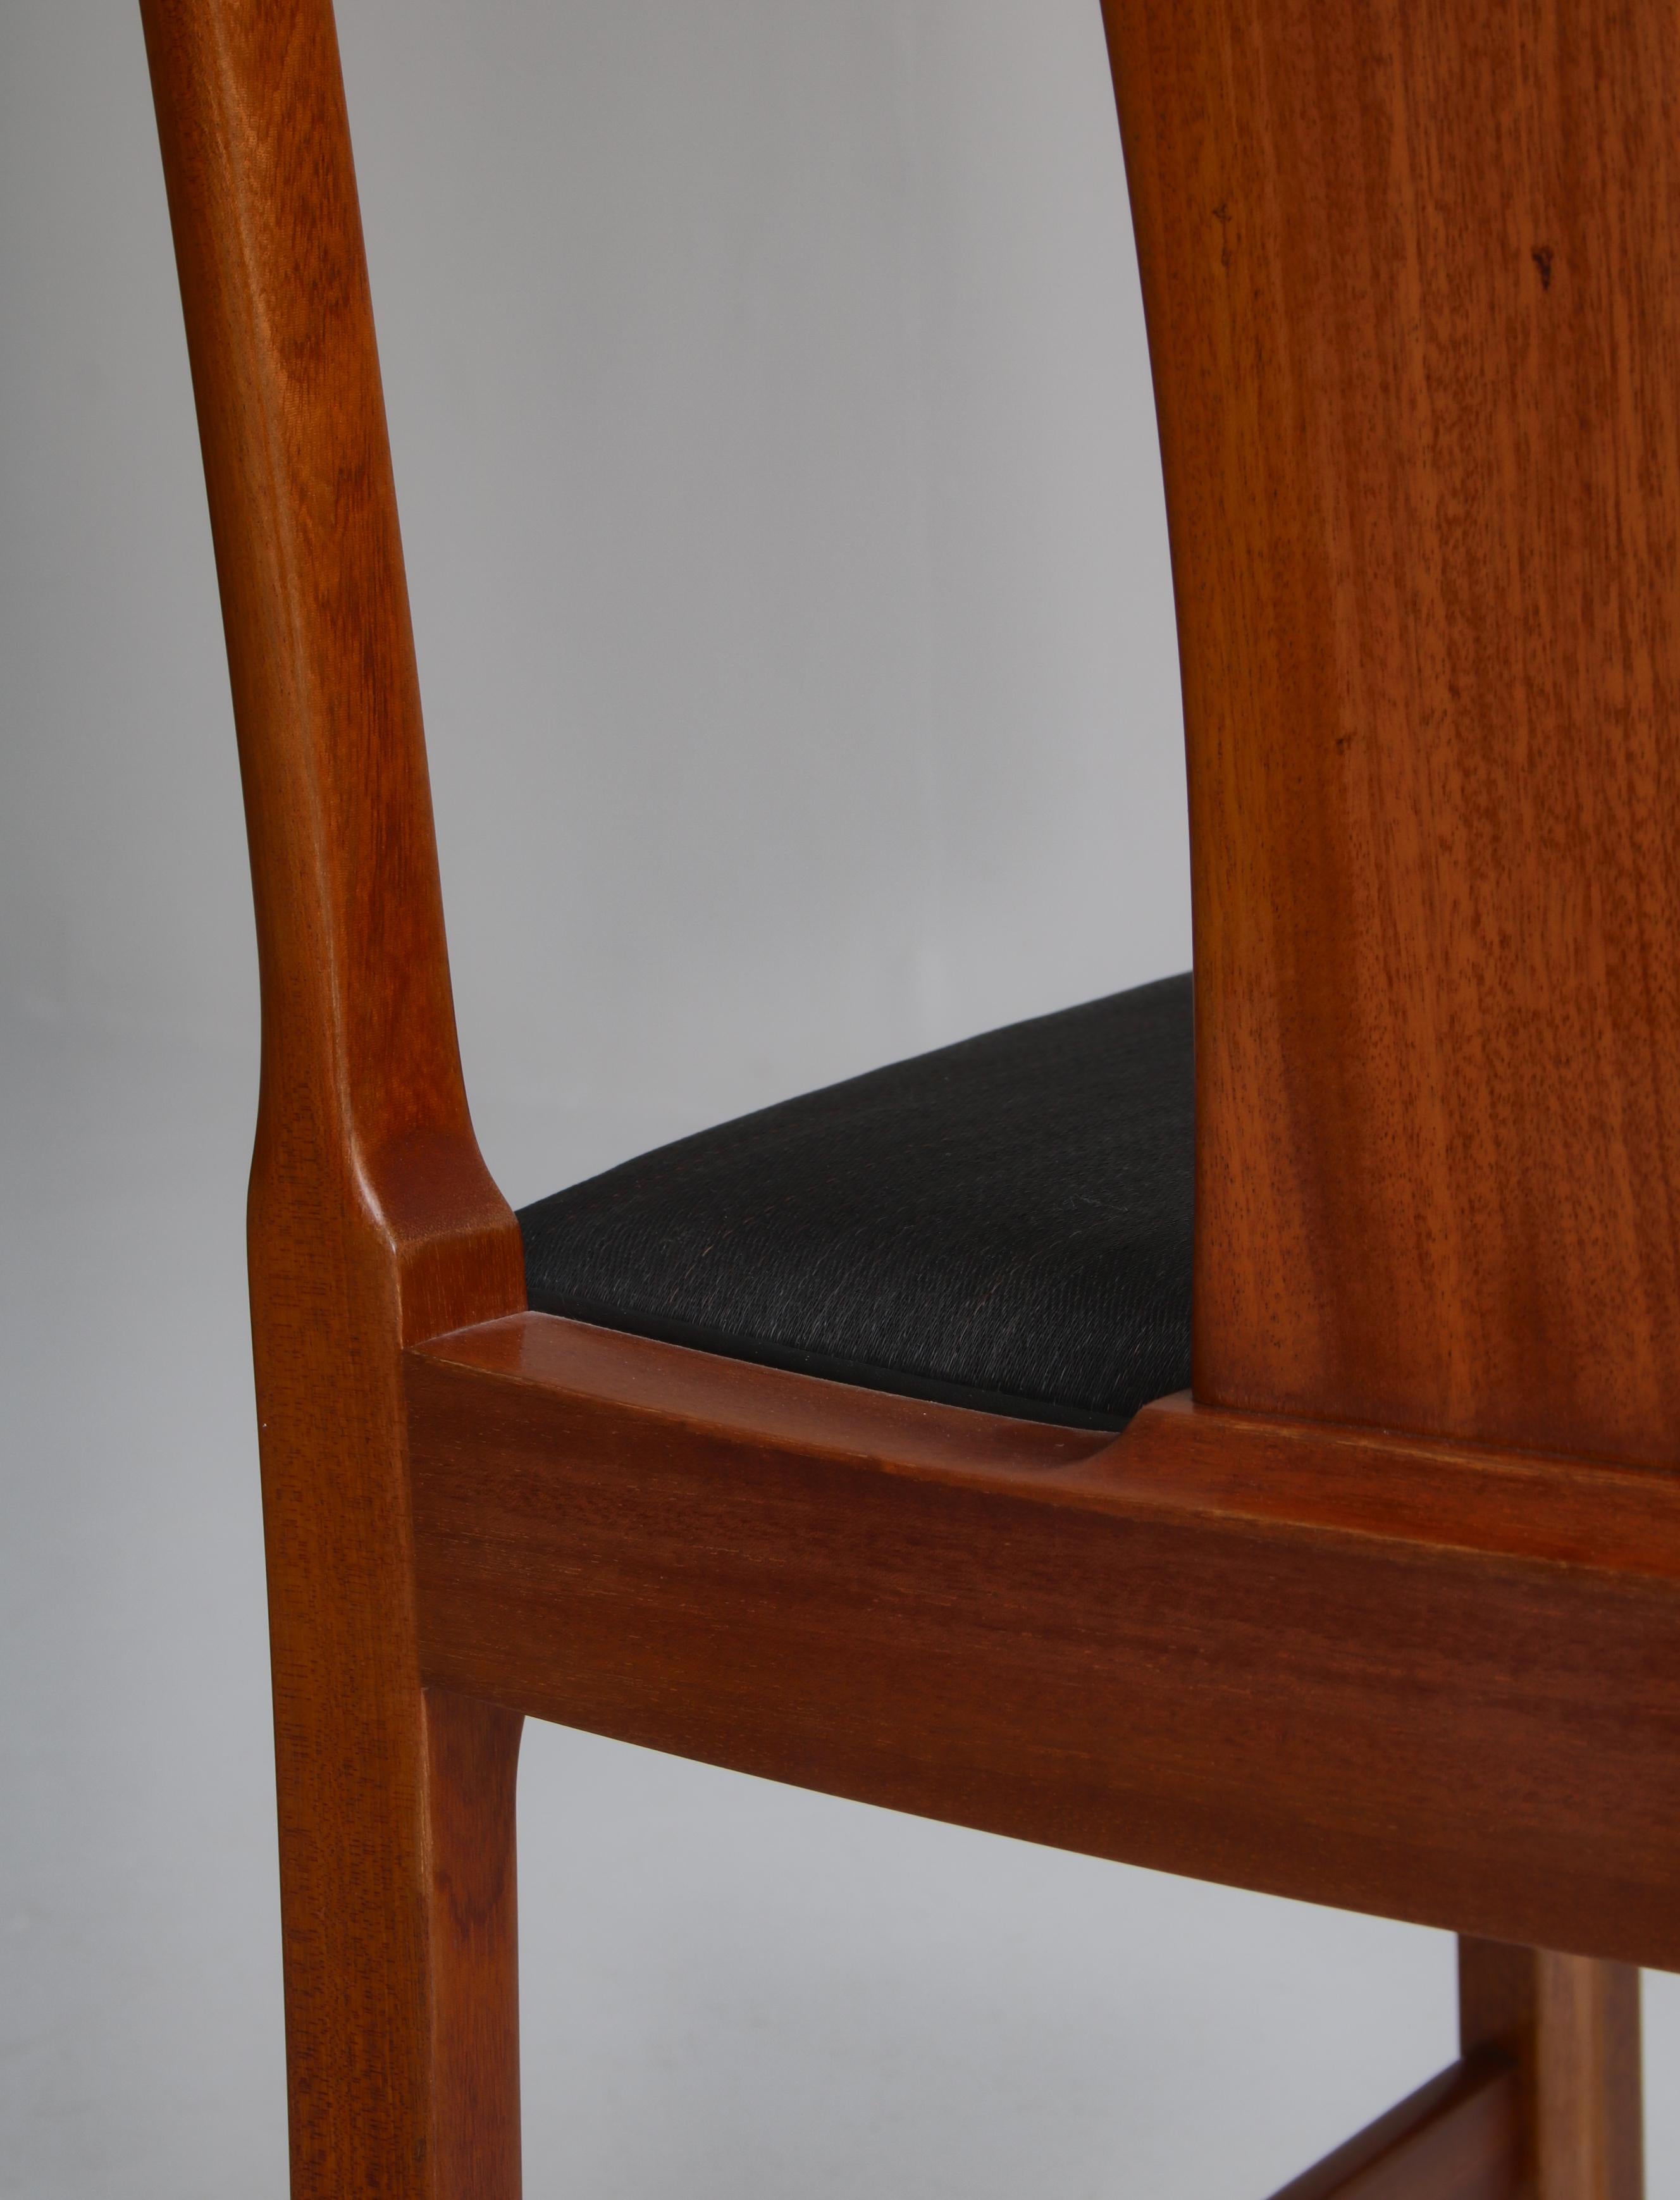 Ole Wanscher Dining Chairs in Mahogany and Horsehair Made by A.J. Iversen, 1960s For Sale 9